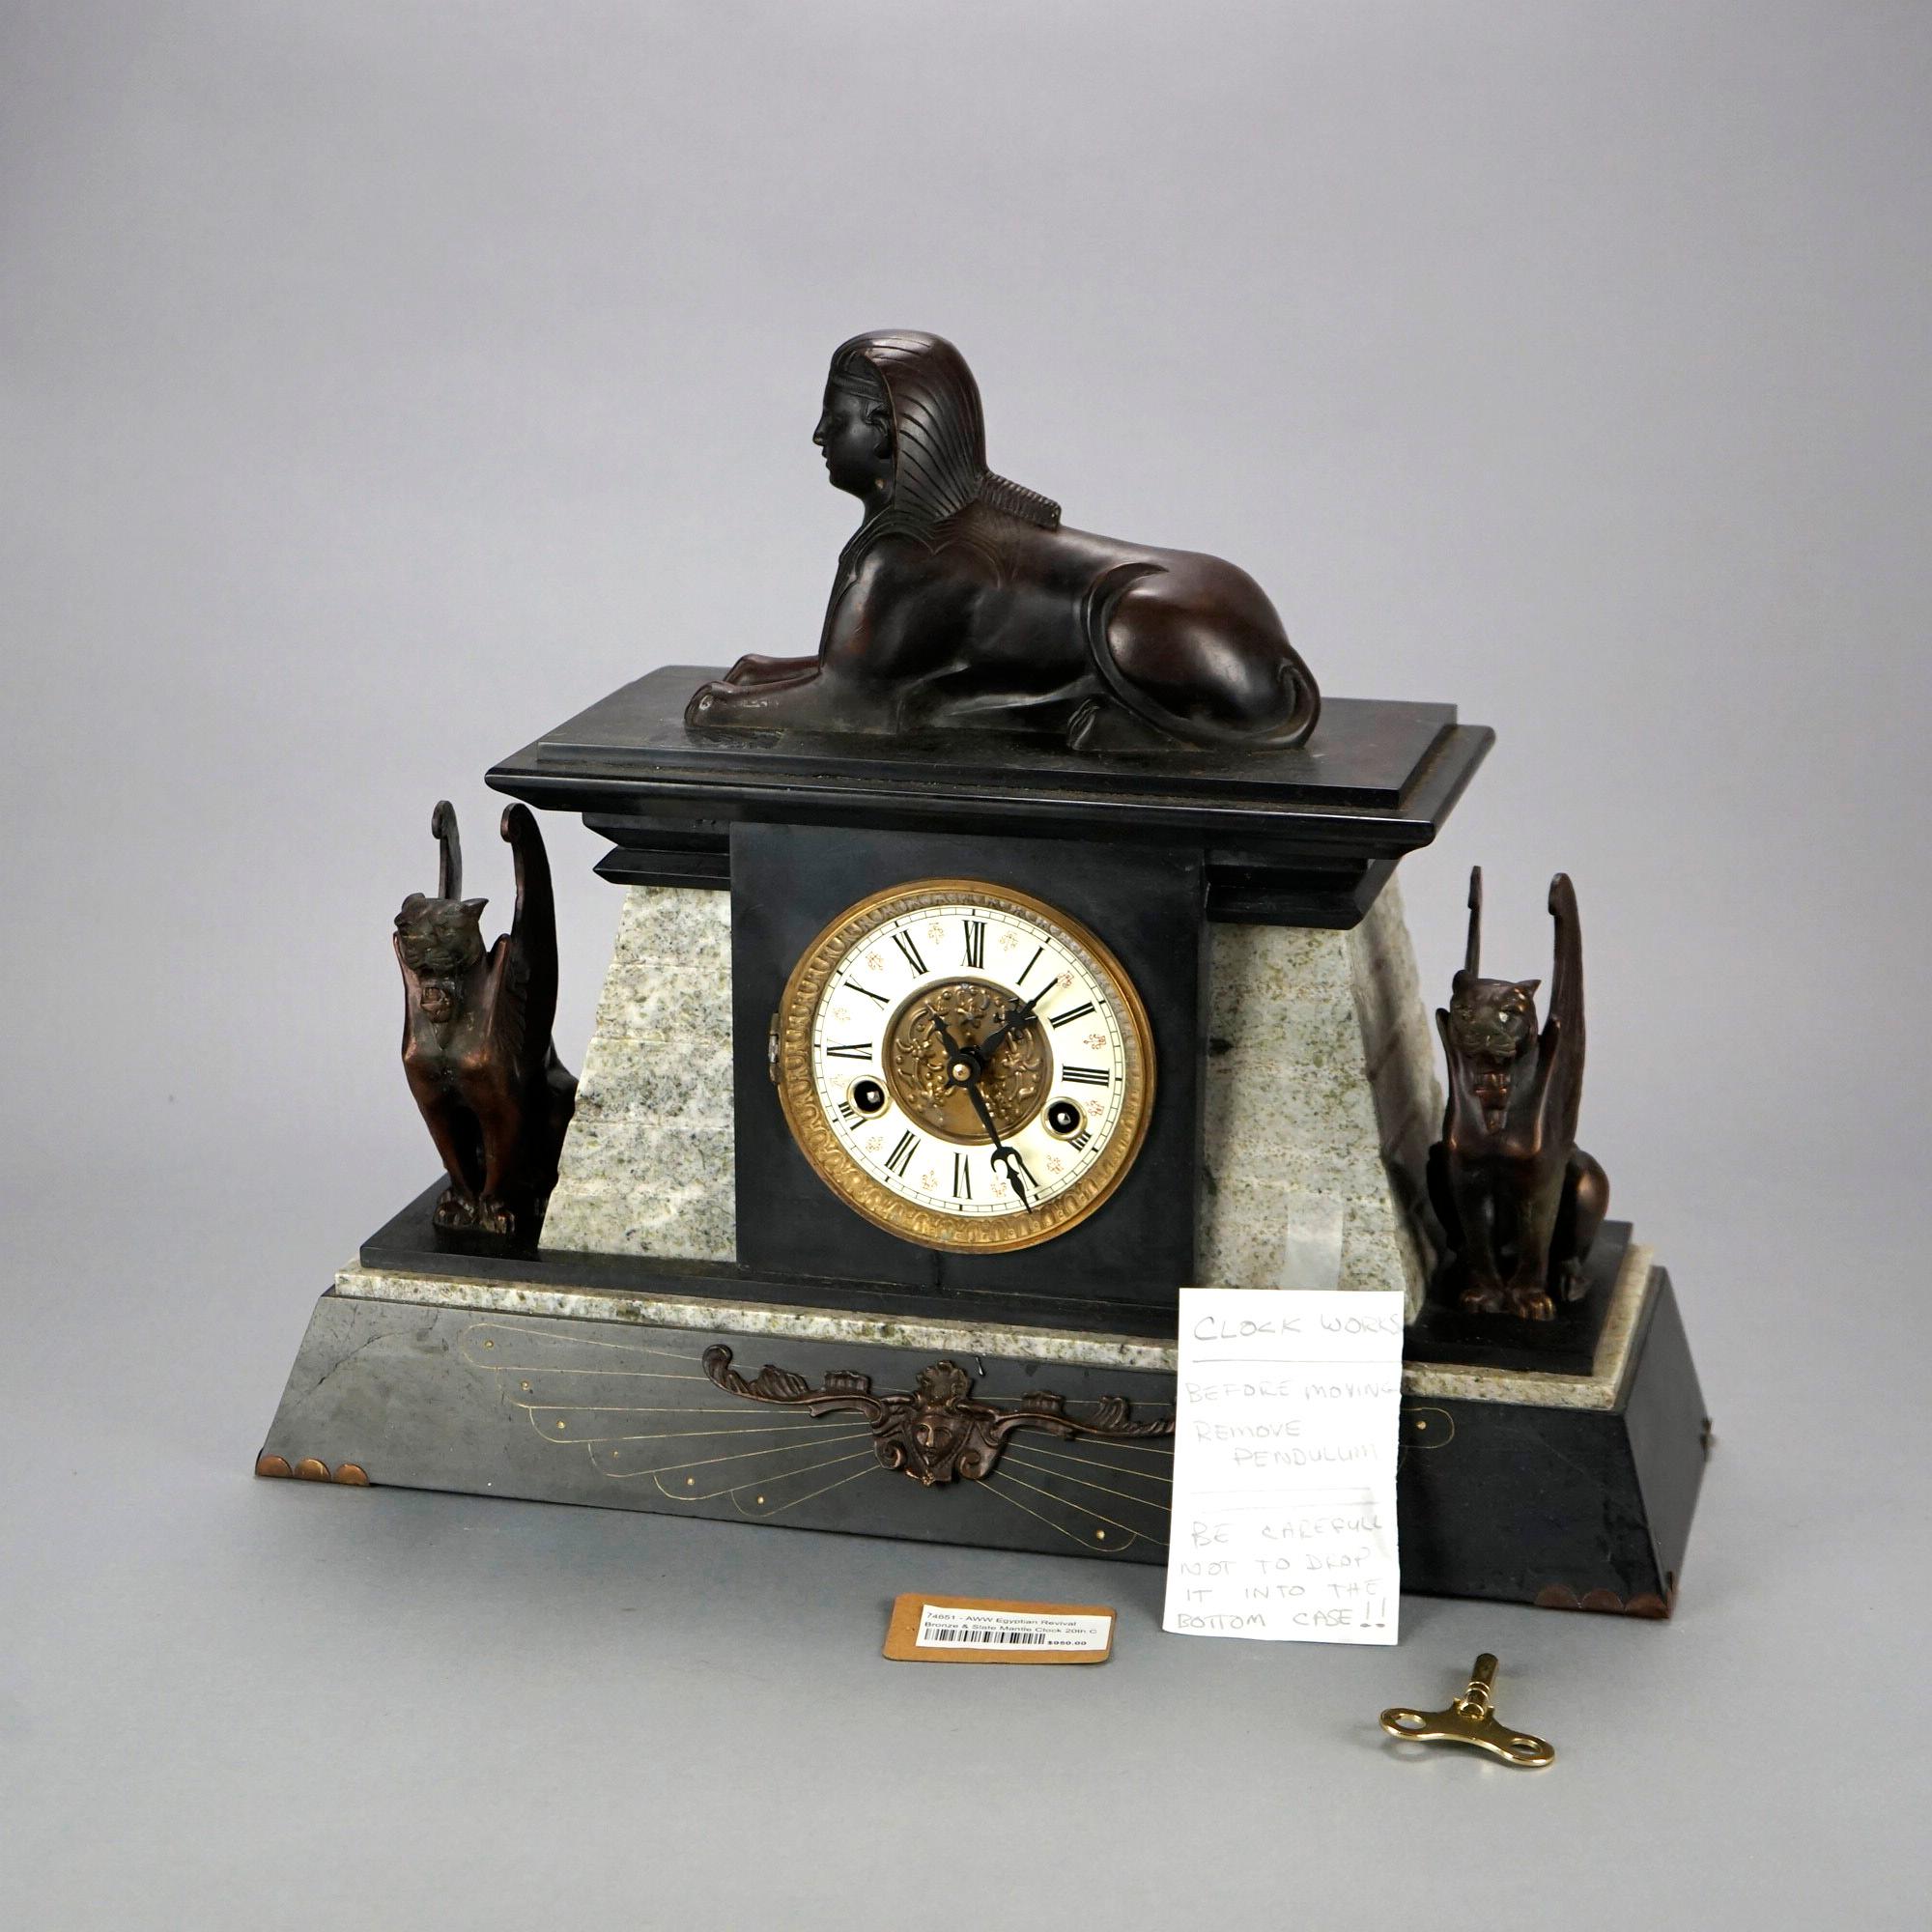 A French figural Egyptian Revival mantel clock offers cast bronze sphinx over slate and marble clock with flanking griffins, working condition, 20th century

Measures- 16''H x 20''W x 7''D.

Catalogue Note: Ask about DISCOUNTED DELIVERY RATES